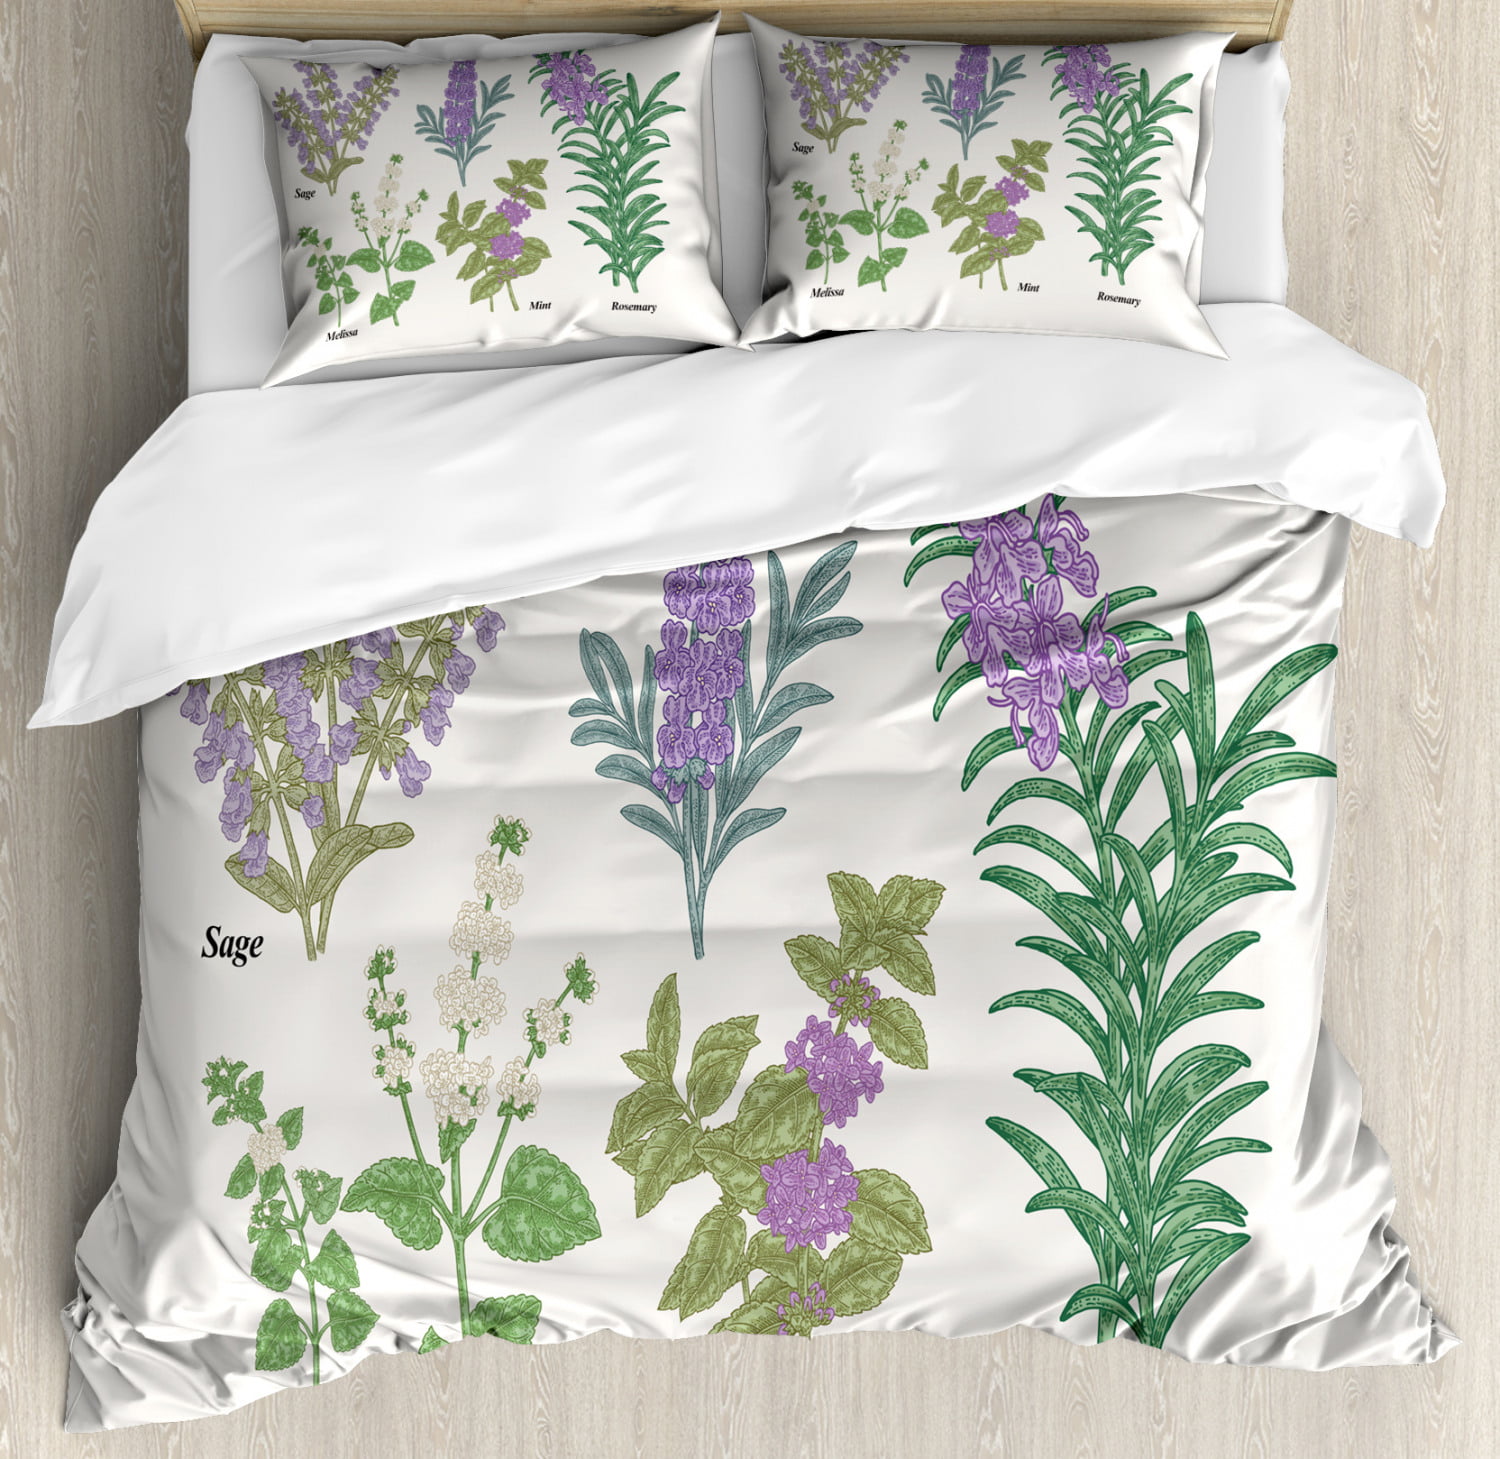 Botanical Infographic with Sage Melissa Lavender Mint and Rosemary Plants Ambesonne Herb Soft Flannel Fleece Throw Blanket Cozy Plush for Indoor and Outdoor Use 50 x 60 Coconut and Multicolor